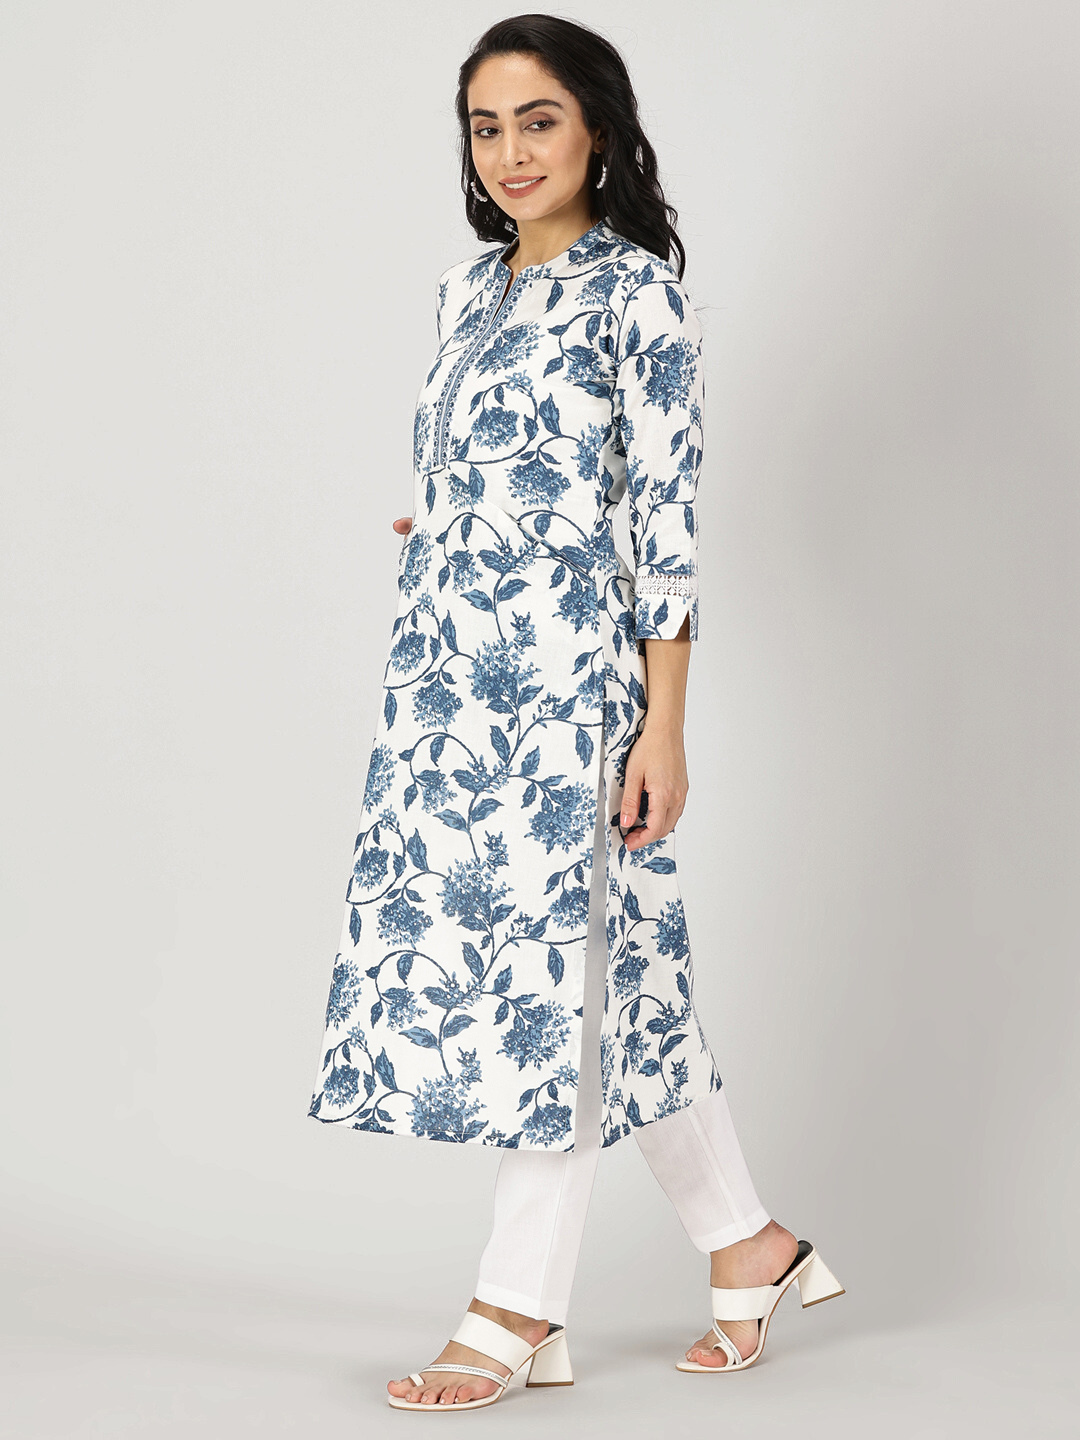 White-Blue Floral Print Kurta with Neck Embroidery